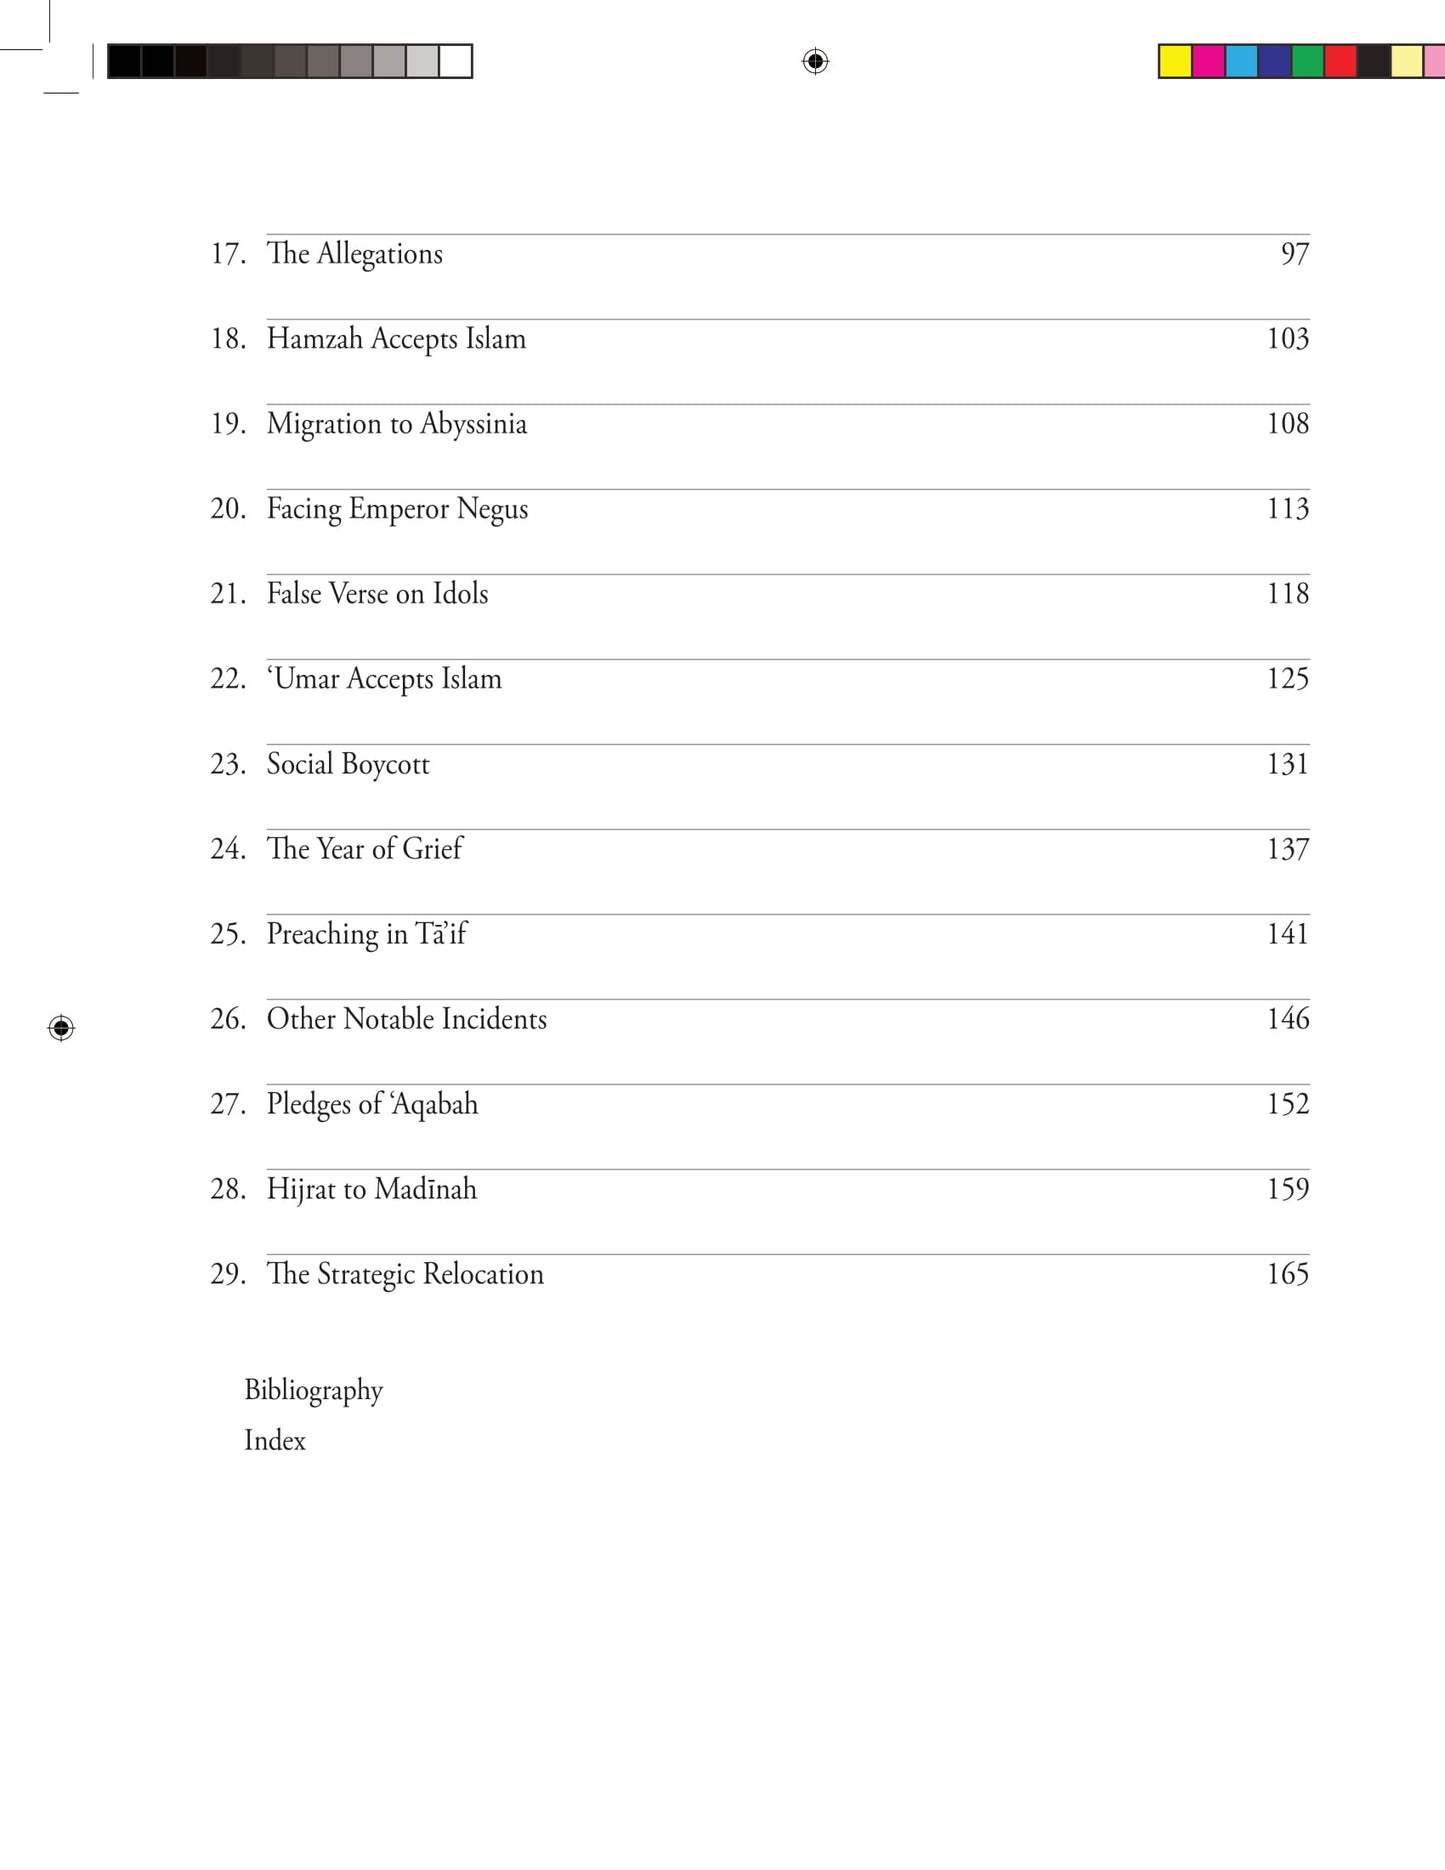 Life of Rasulullah - Makkah Period - Seerah - Weekend Learning Publishers - Table of Contents - Page 2